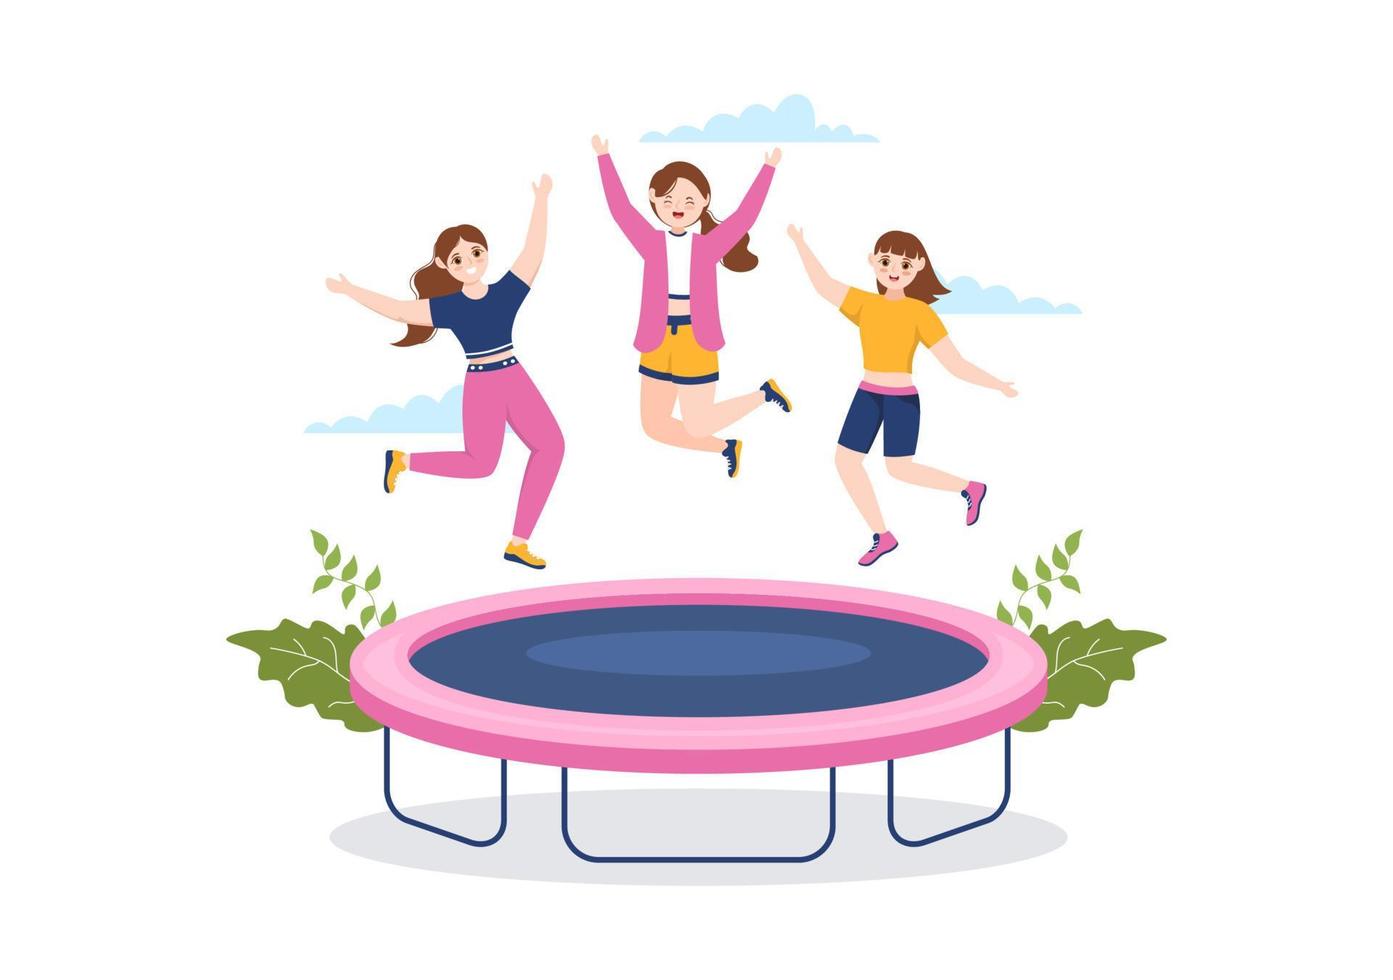 Trampoline Illustration with Youth Jumping On a Trampolines in Hand Drawn Flat Cartoon Summer Outdoor Activity Background Template vector